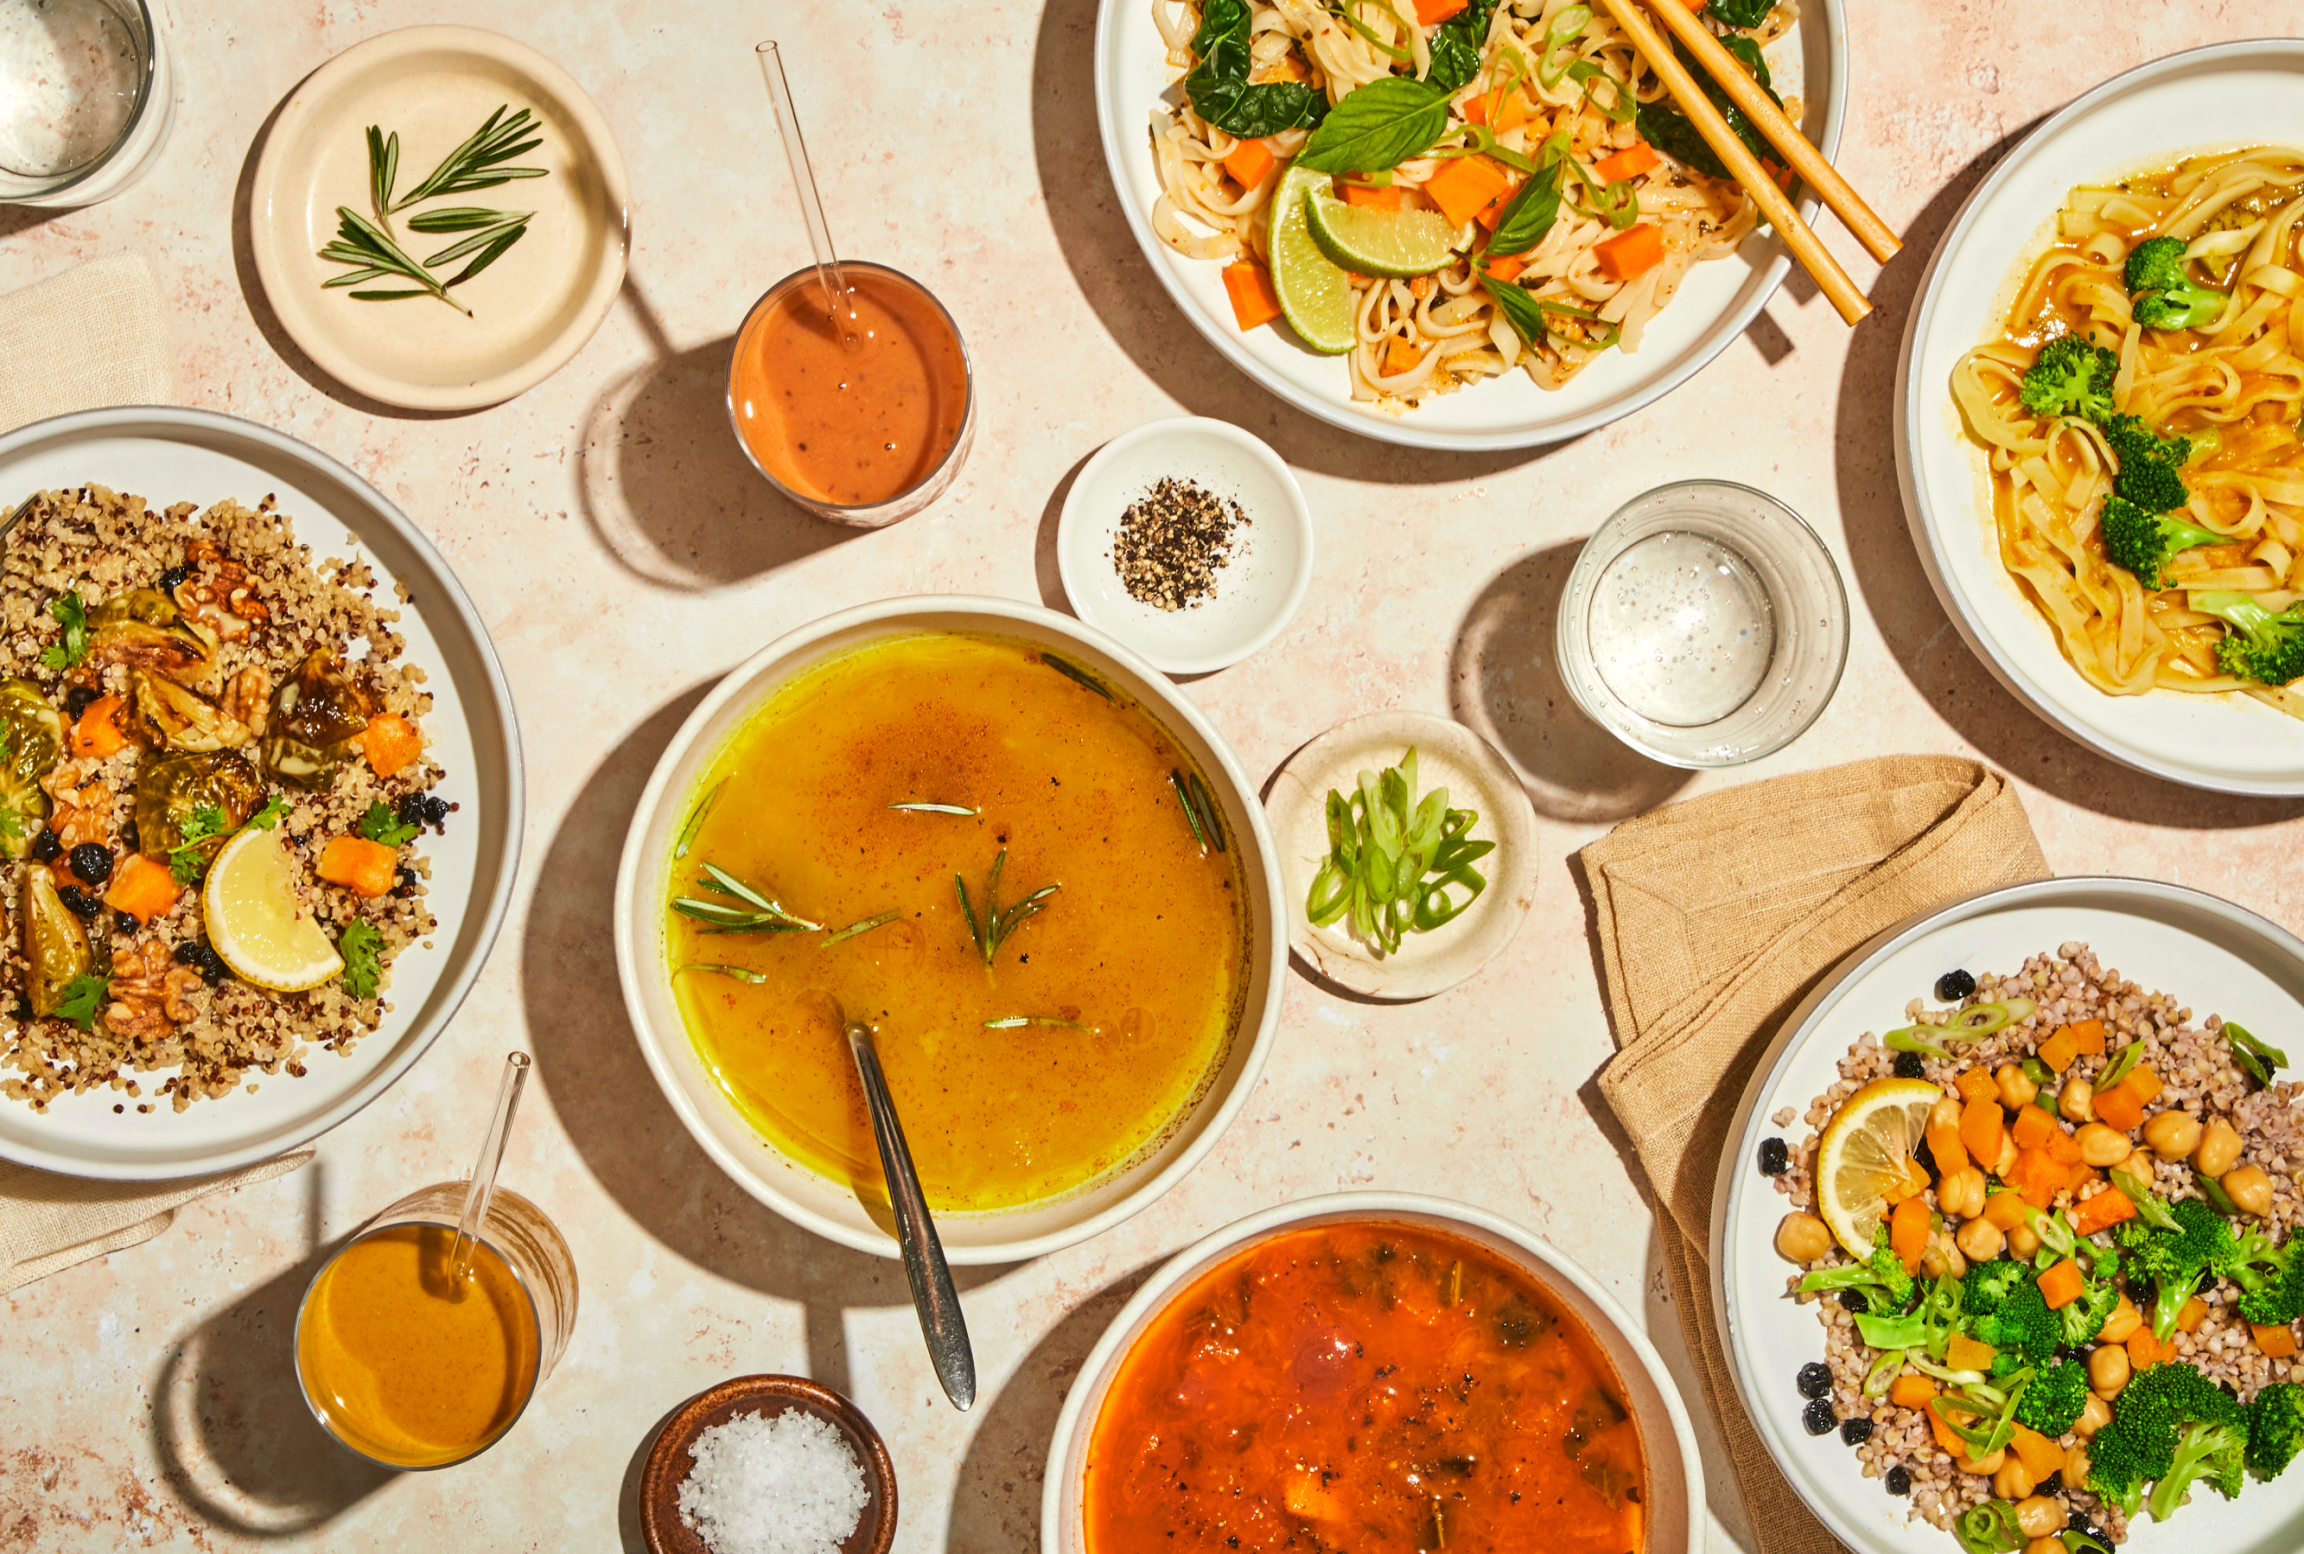 an abundant table scape of healthy plant-based prepared foods from Splendid Spoon